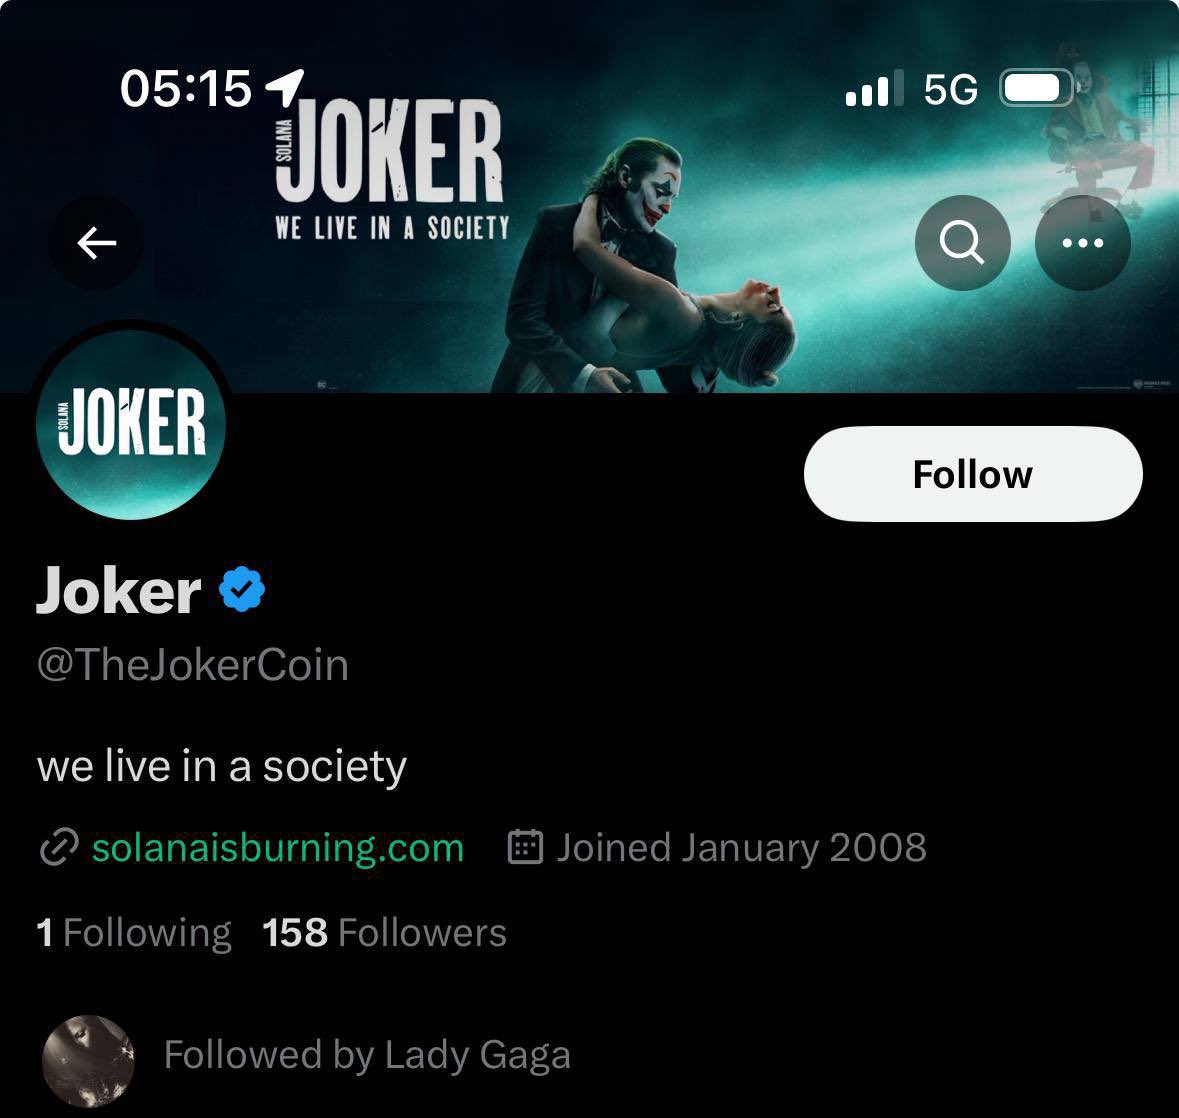 I smell 🔥🔥 is coming. ART unveiled this weekend The Joker, a future SPL-404 NFT project followed by #LadyGaga dexscreener.com/solana/2qipz6v… I see this doing a 100x from here #JokerOnSolana